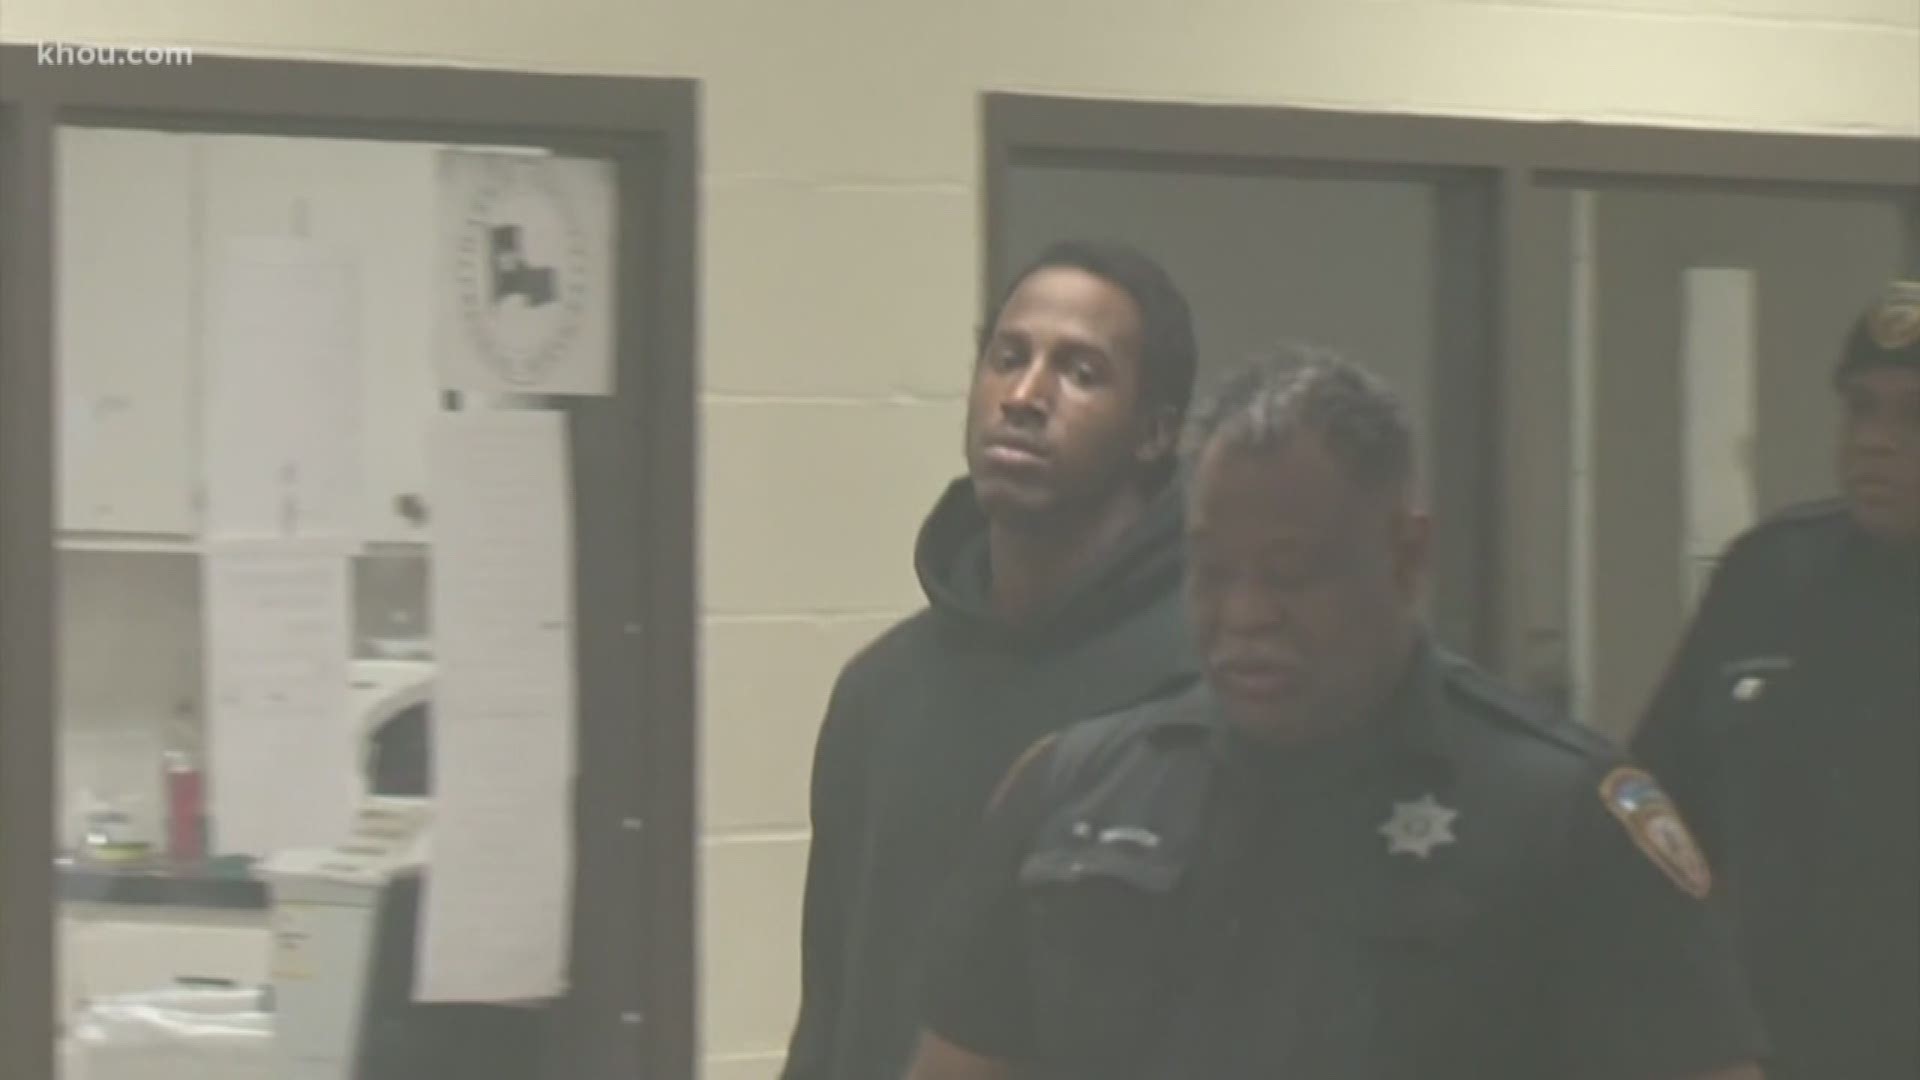 Three suspects accused of forcing a woman into prostitution went before a judge overnight.